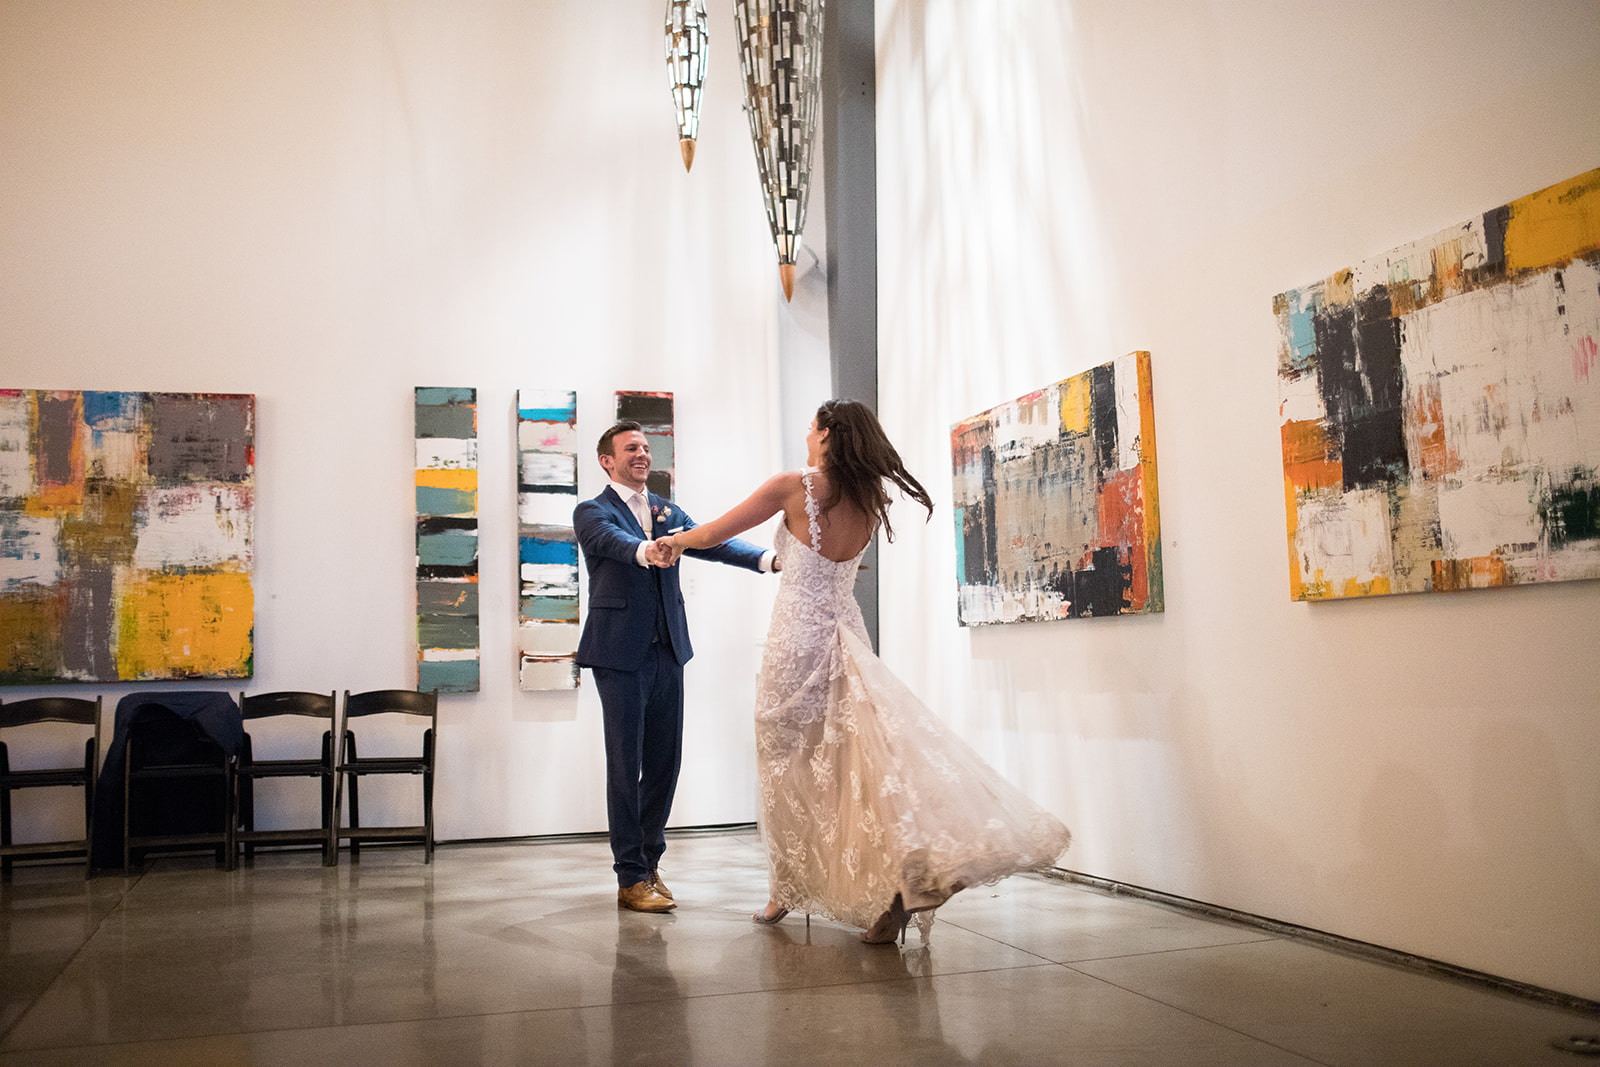 kali and jensen first dance at space gallery wedding reception